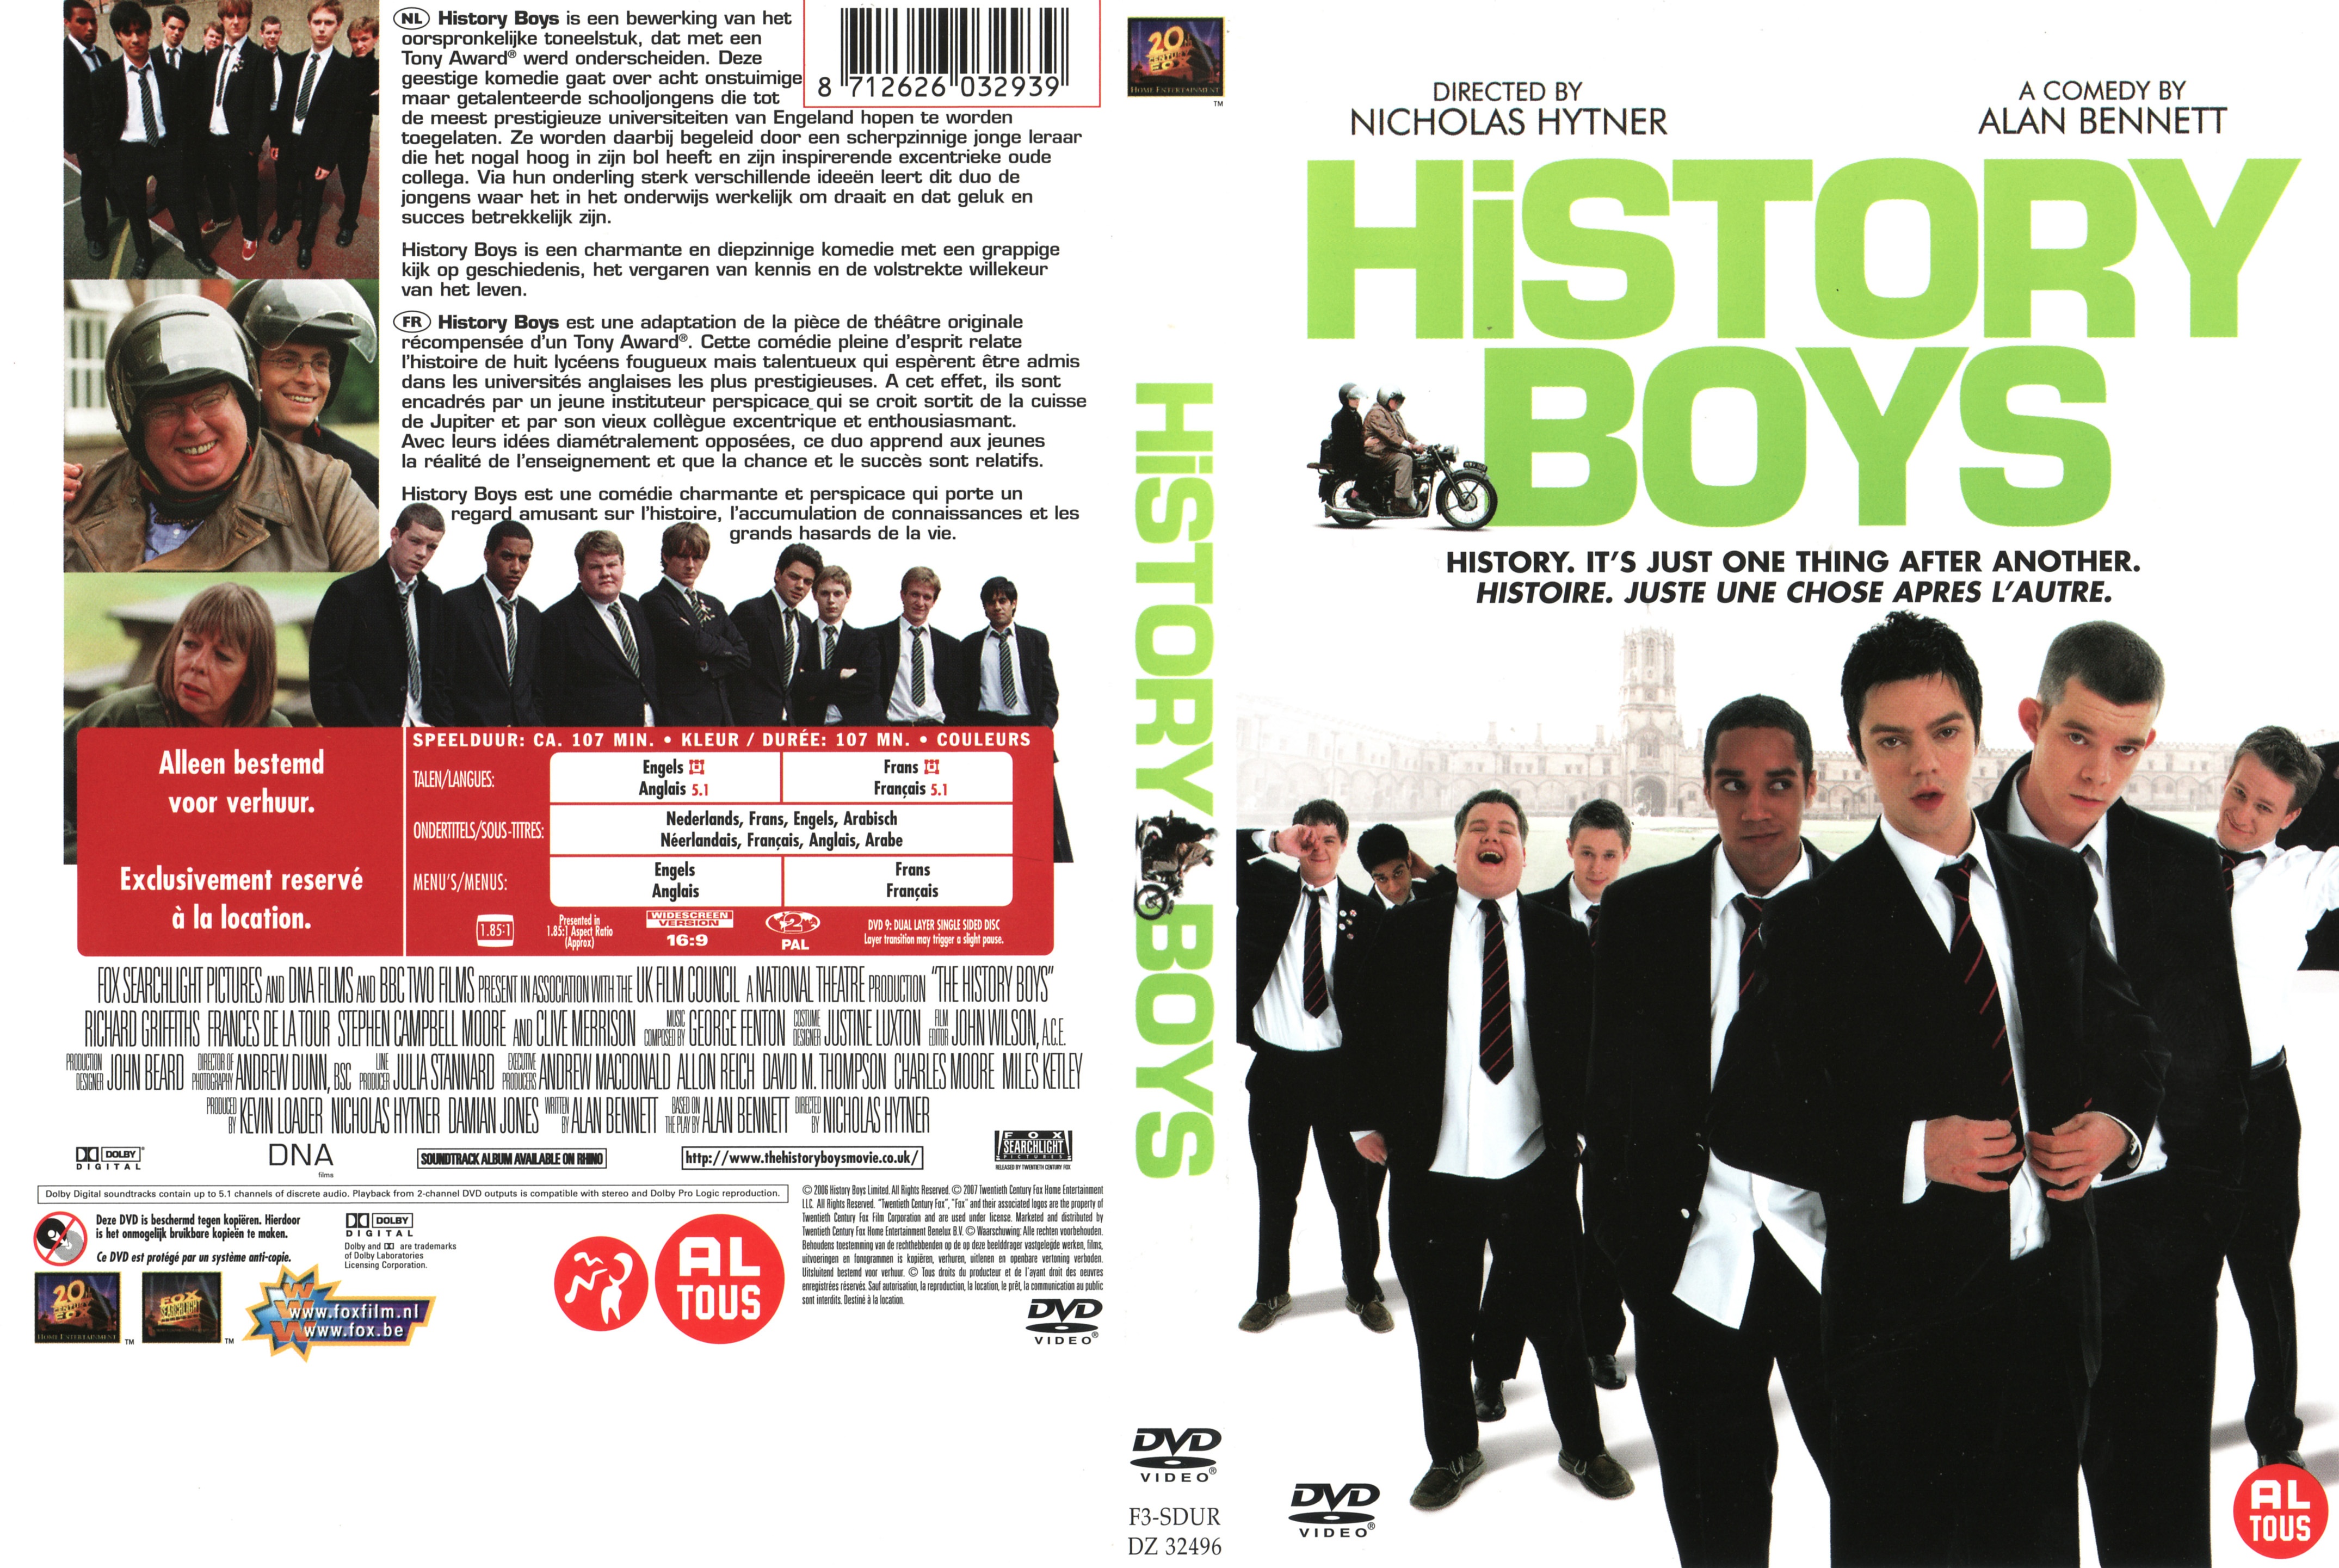 Jaquette DVD History boys